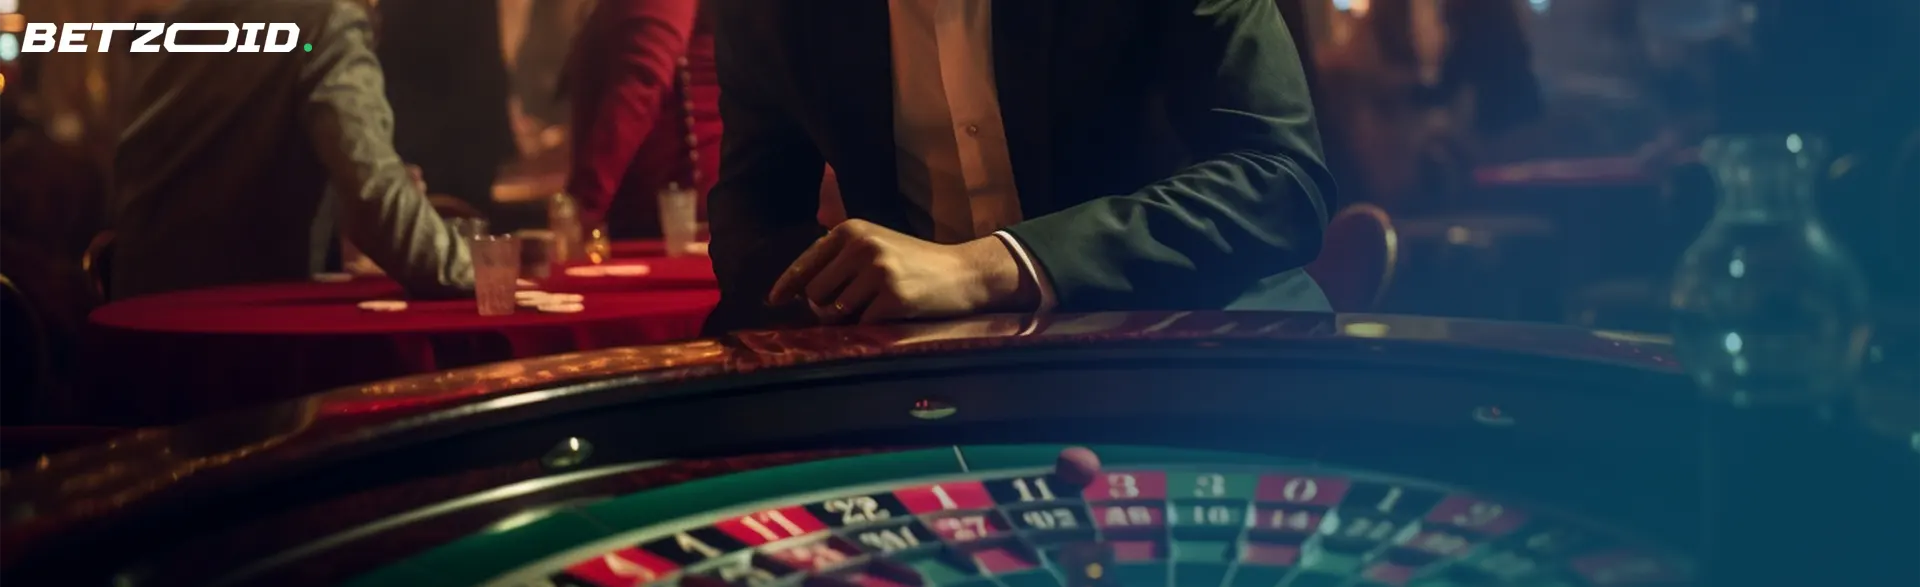 The player waits to see where the ball will fall in live roulette casinos.